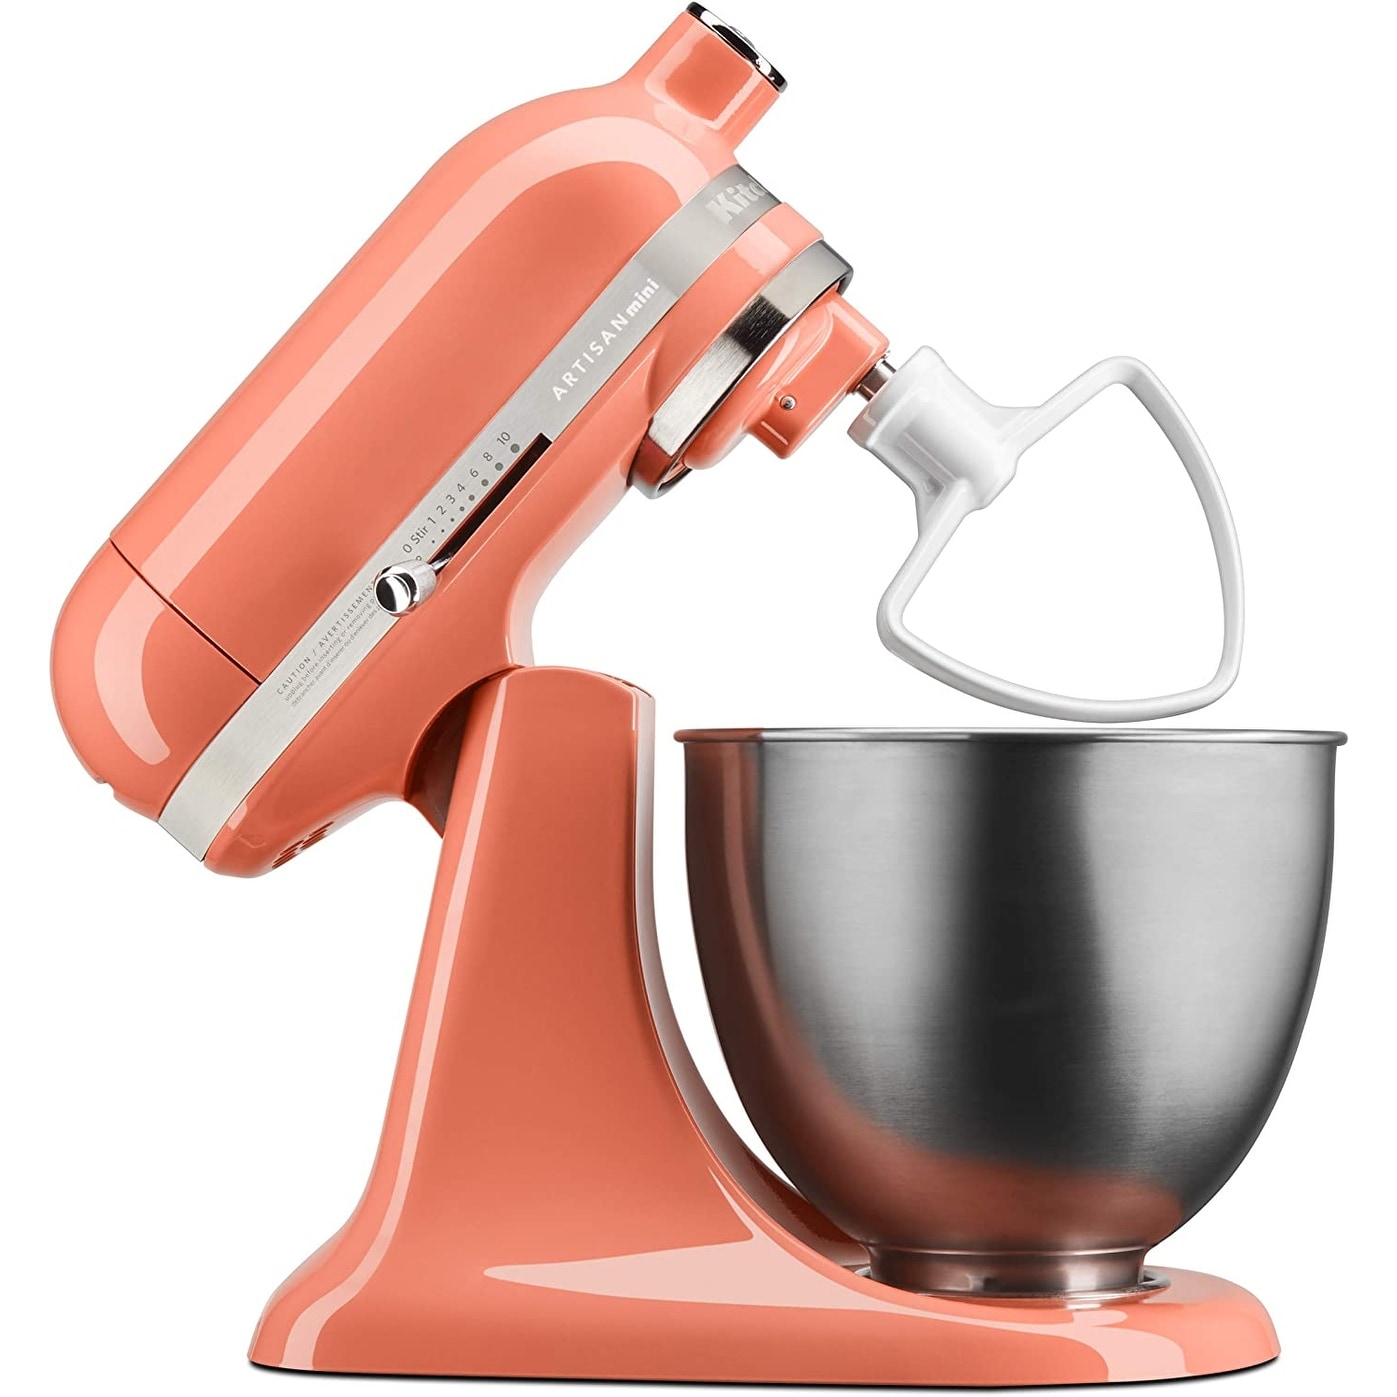 KitchenAid 7-Qt. Bowl Lift Stand Mixer in Feather Pink